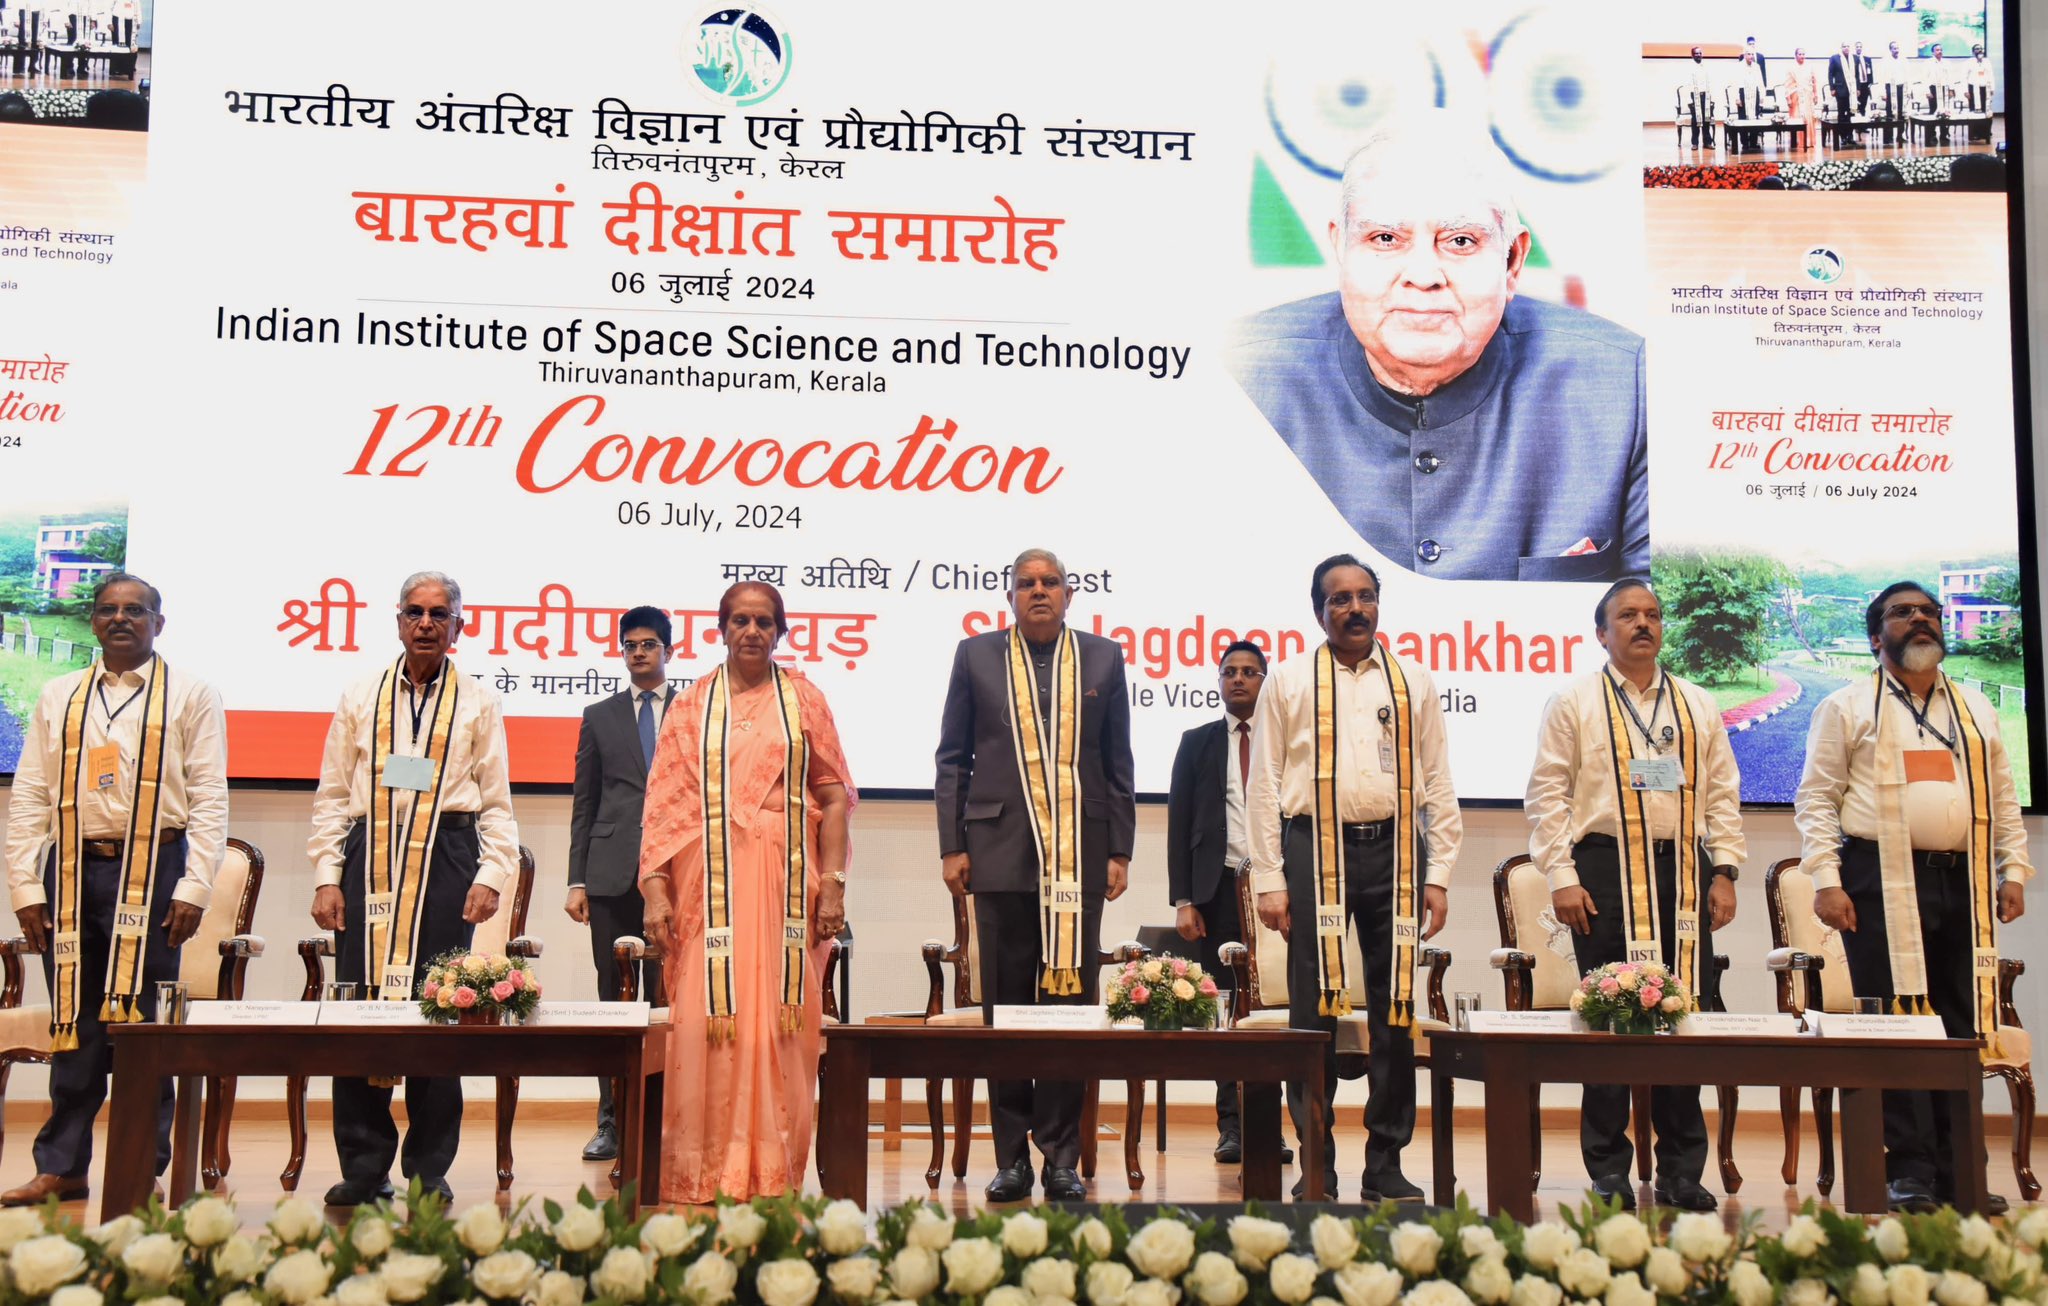 The Vice-President, Shri Jagdeep Dhankhar at the 12th convocation of Indian Institute of Space Science and Technology in Thiruvananthapuram, Kerala on July 6, 2024.